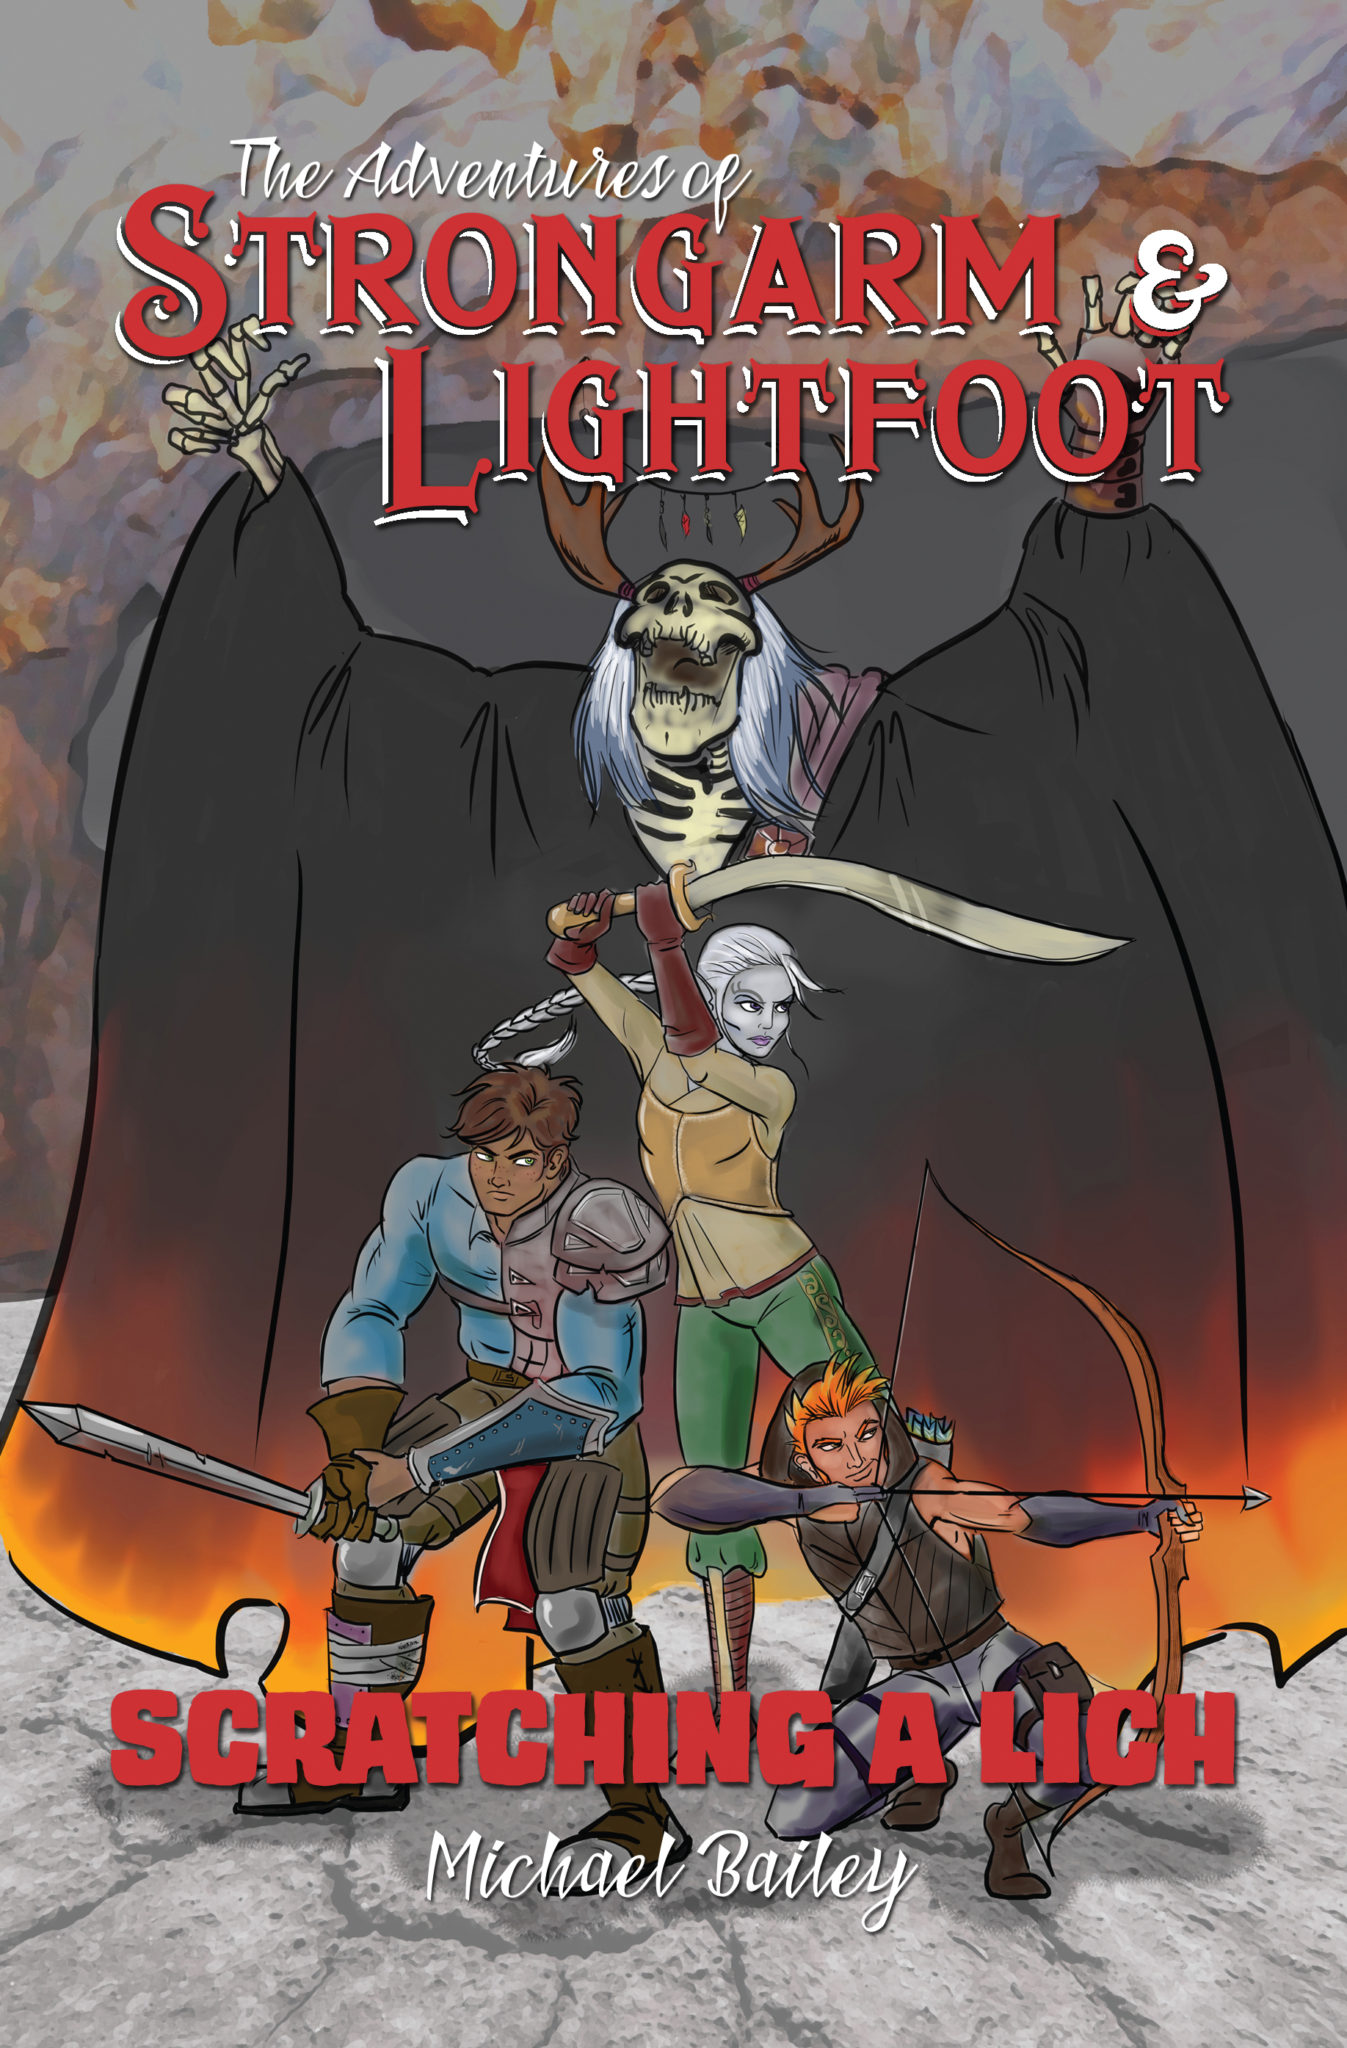 FREE: The Adventures of Strongarm & Lightfoot: Scratching a Lich by Michael C. Bailey